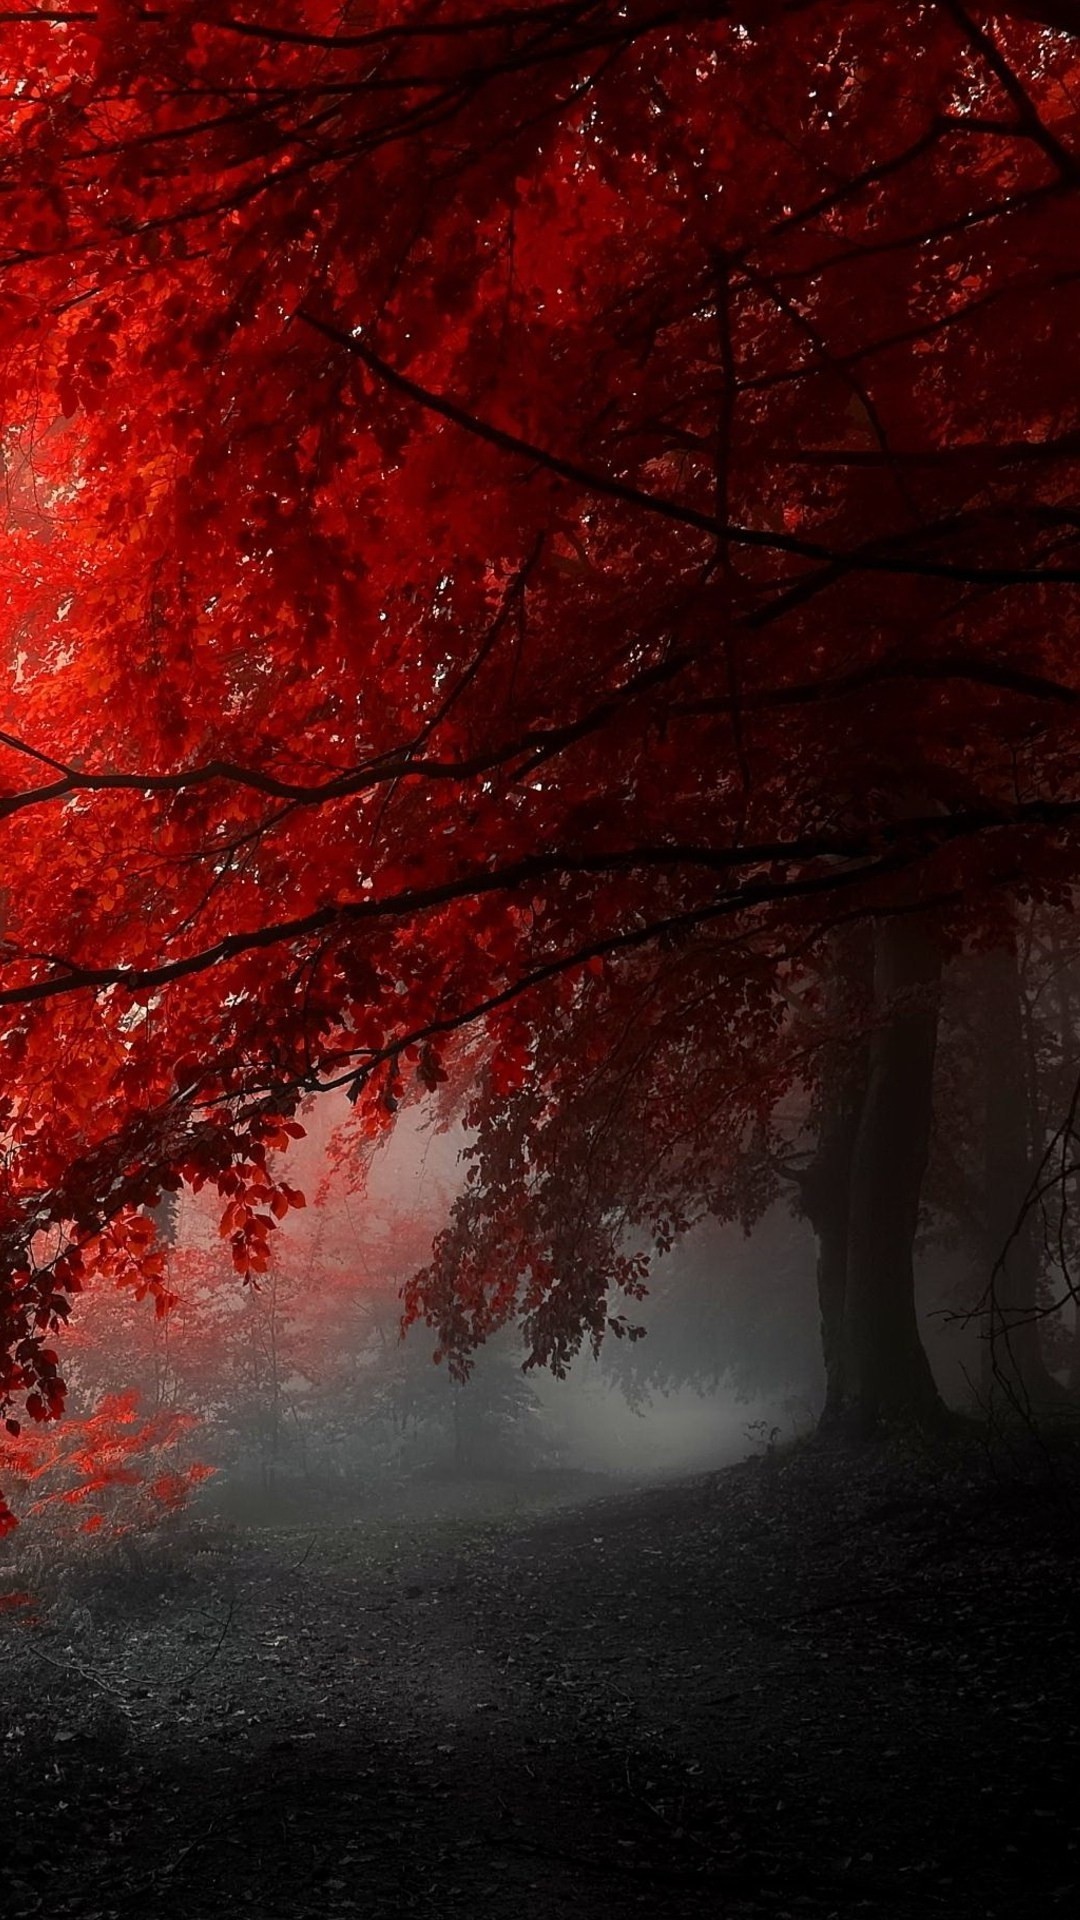 Free Download Foggy Red Tree Wallpaper 1080x19 For Your Desktop Mobile Tablet Explore 43 Red Tree Wallpaper Red Christmas Wallpaper Red Heart Wallpapers Red Forest Wallpaper